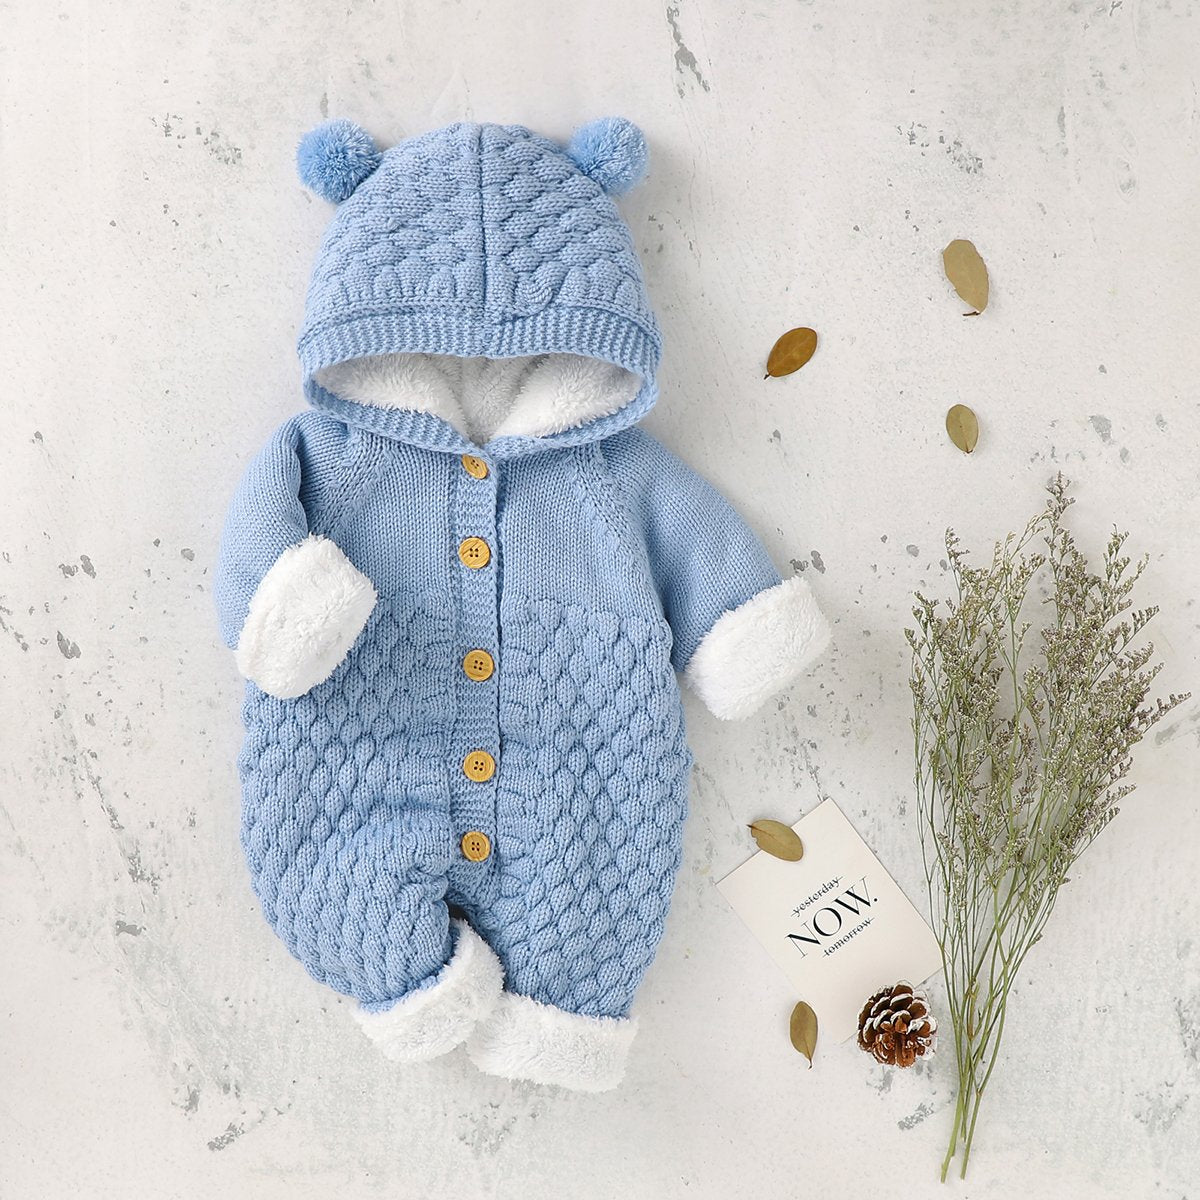 Baby Plus Velvet Thick Three-Dimensional Fur Ball Hooded Knitted Jumpsuit Baby Clothes Wholesale Distributors